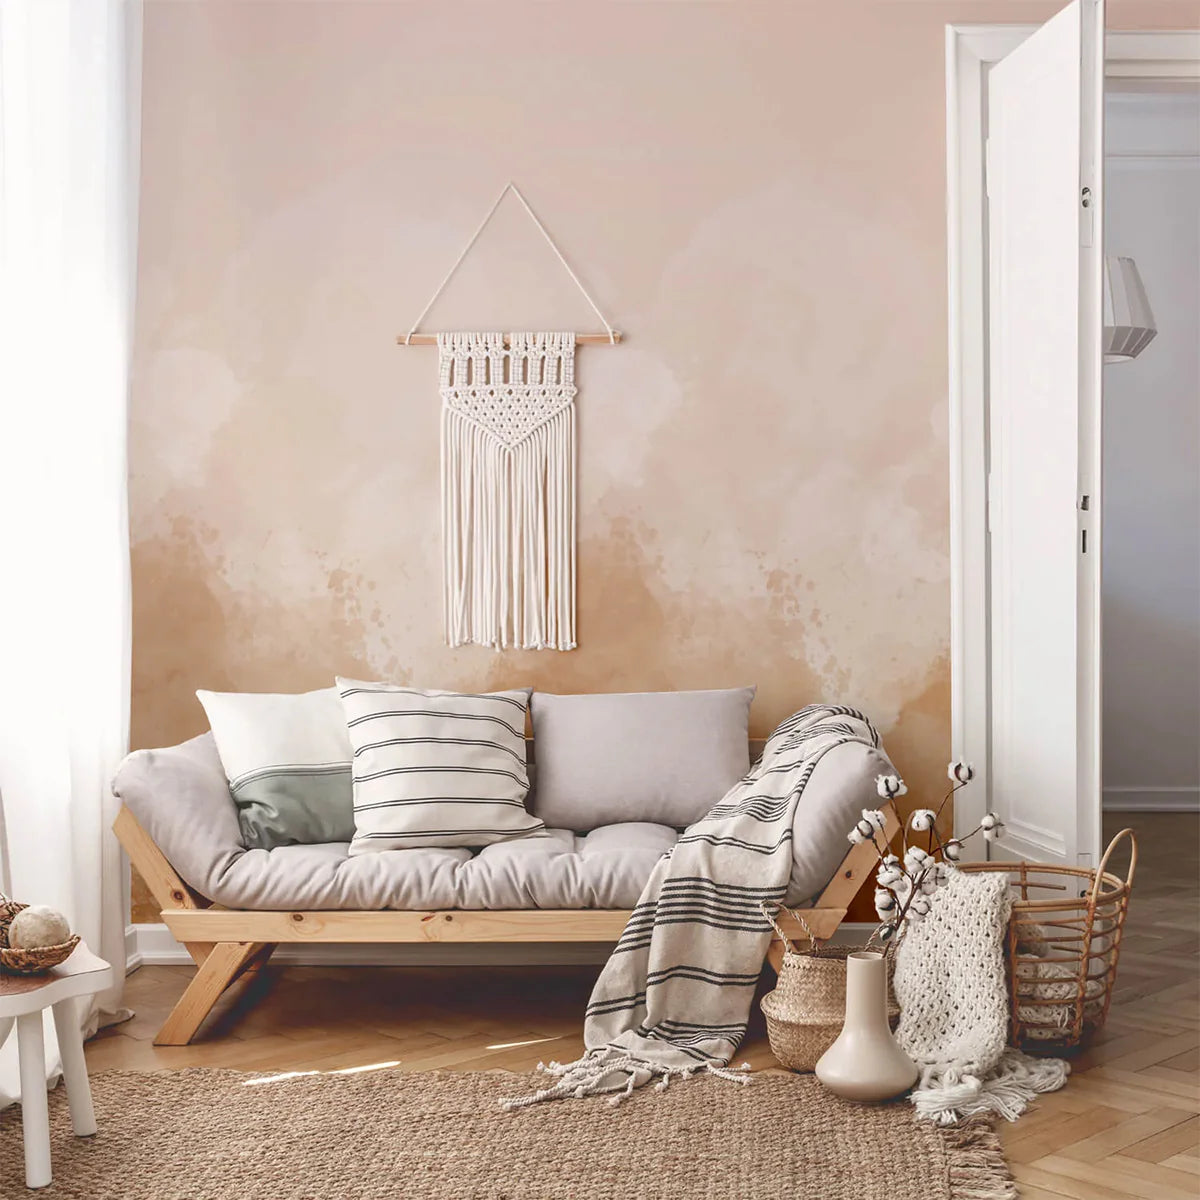 Watercolour Pastel, Ombre Mural Wallpaper in living room